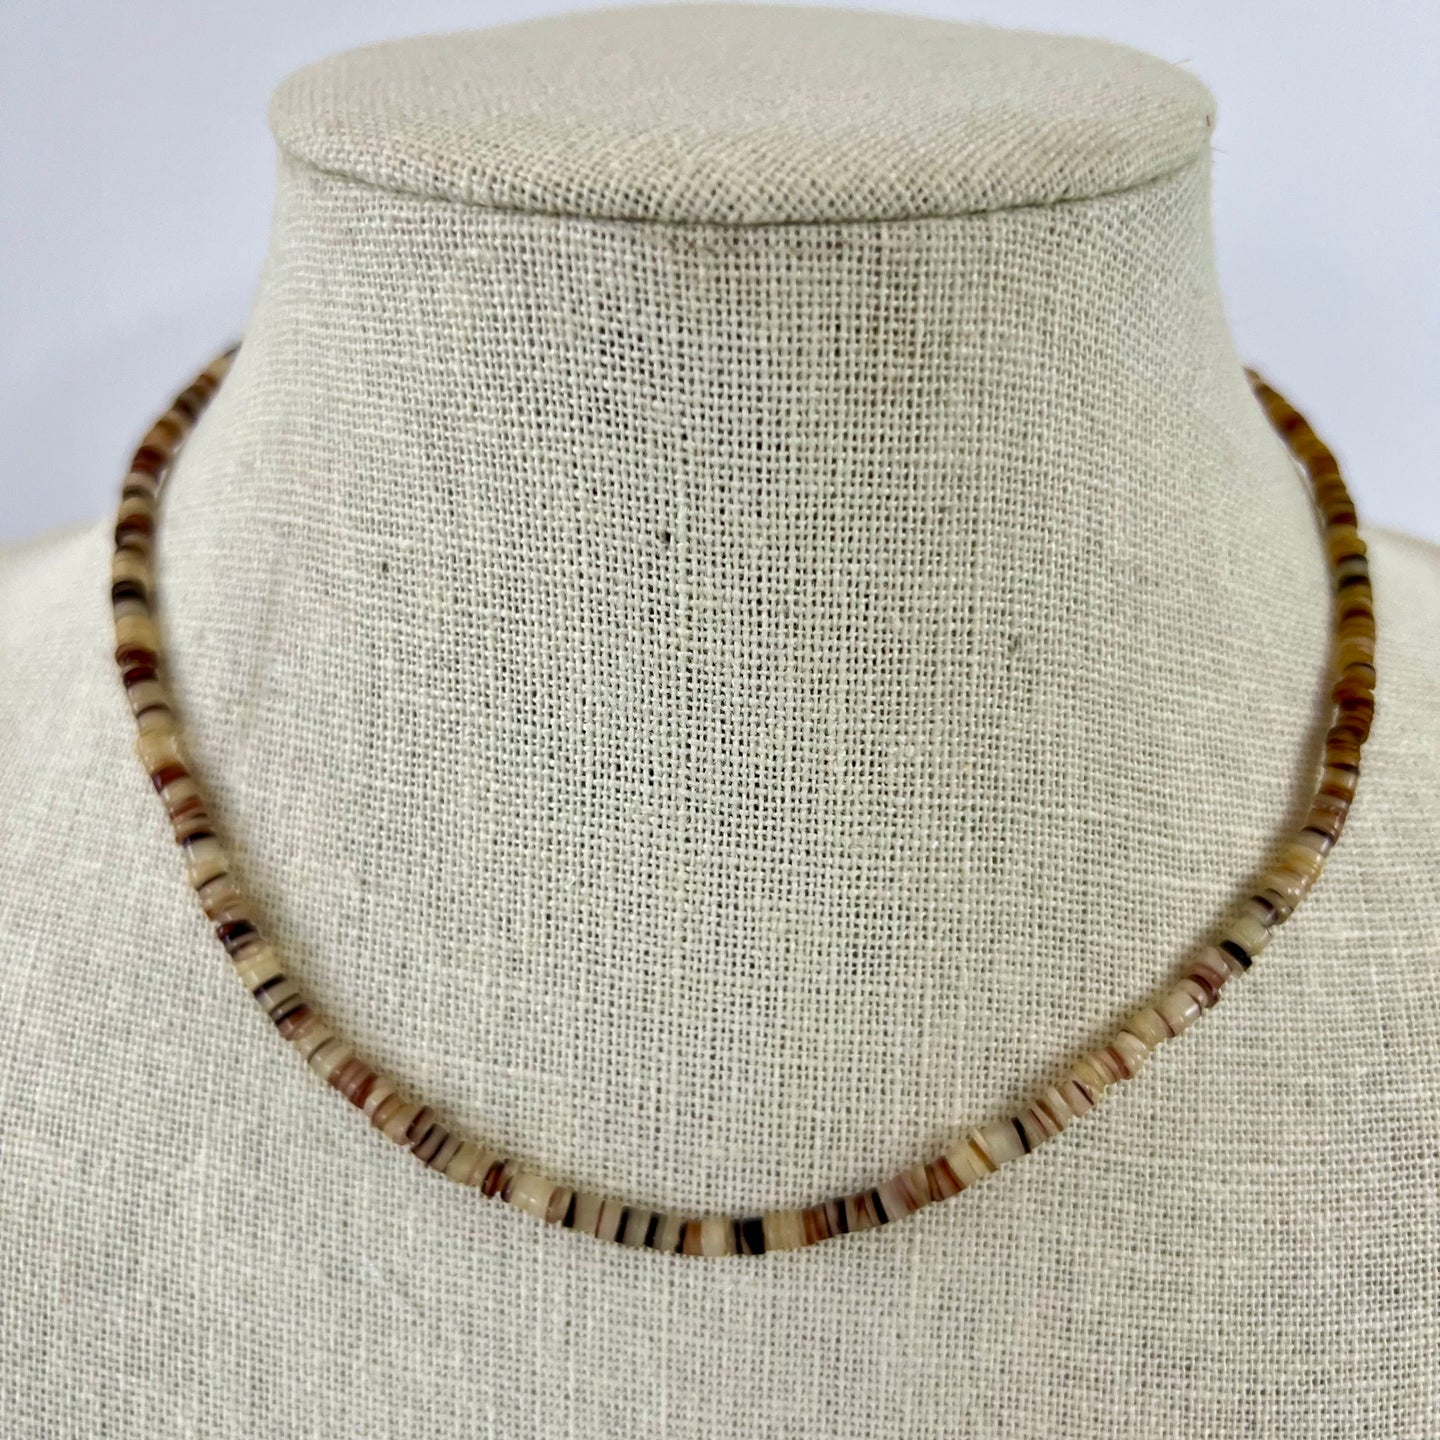 Vintage Thin Shell Bead Necklace